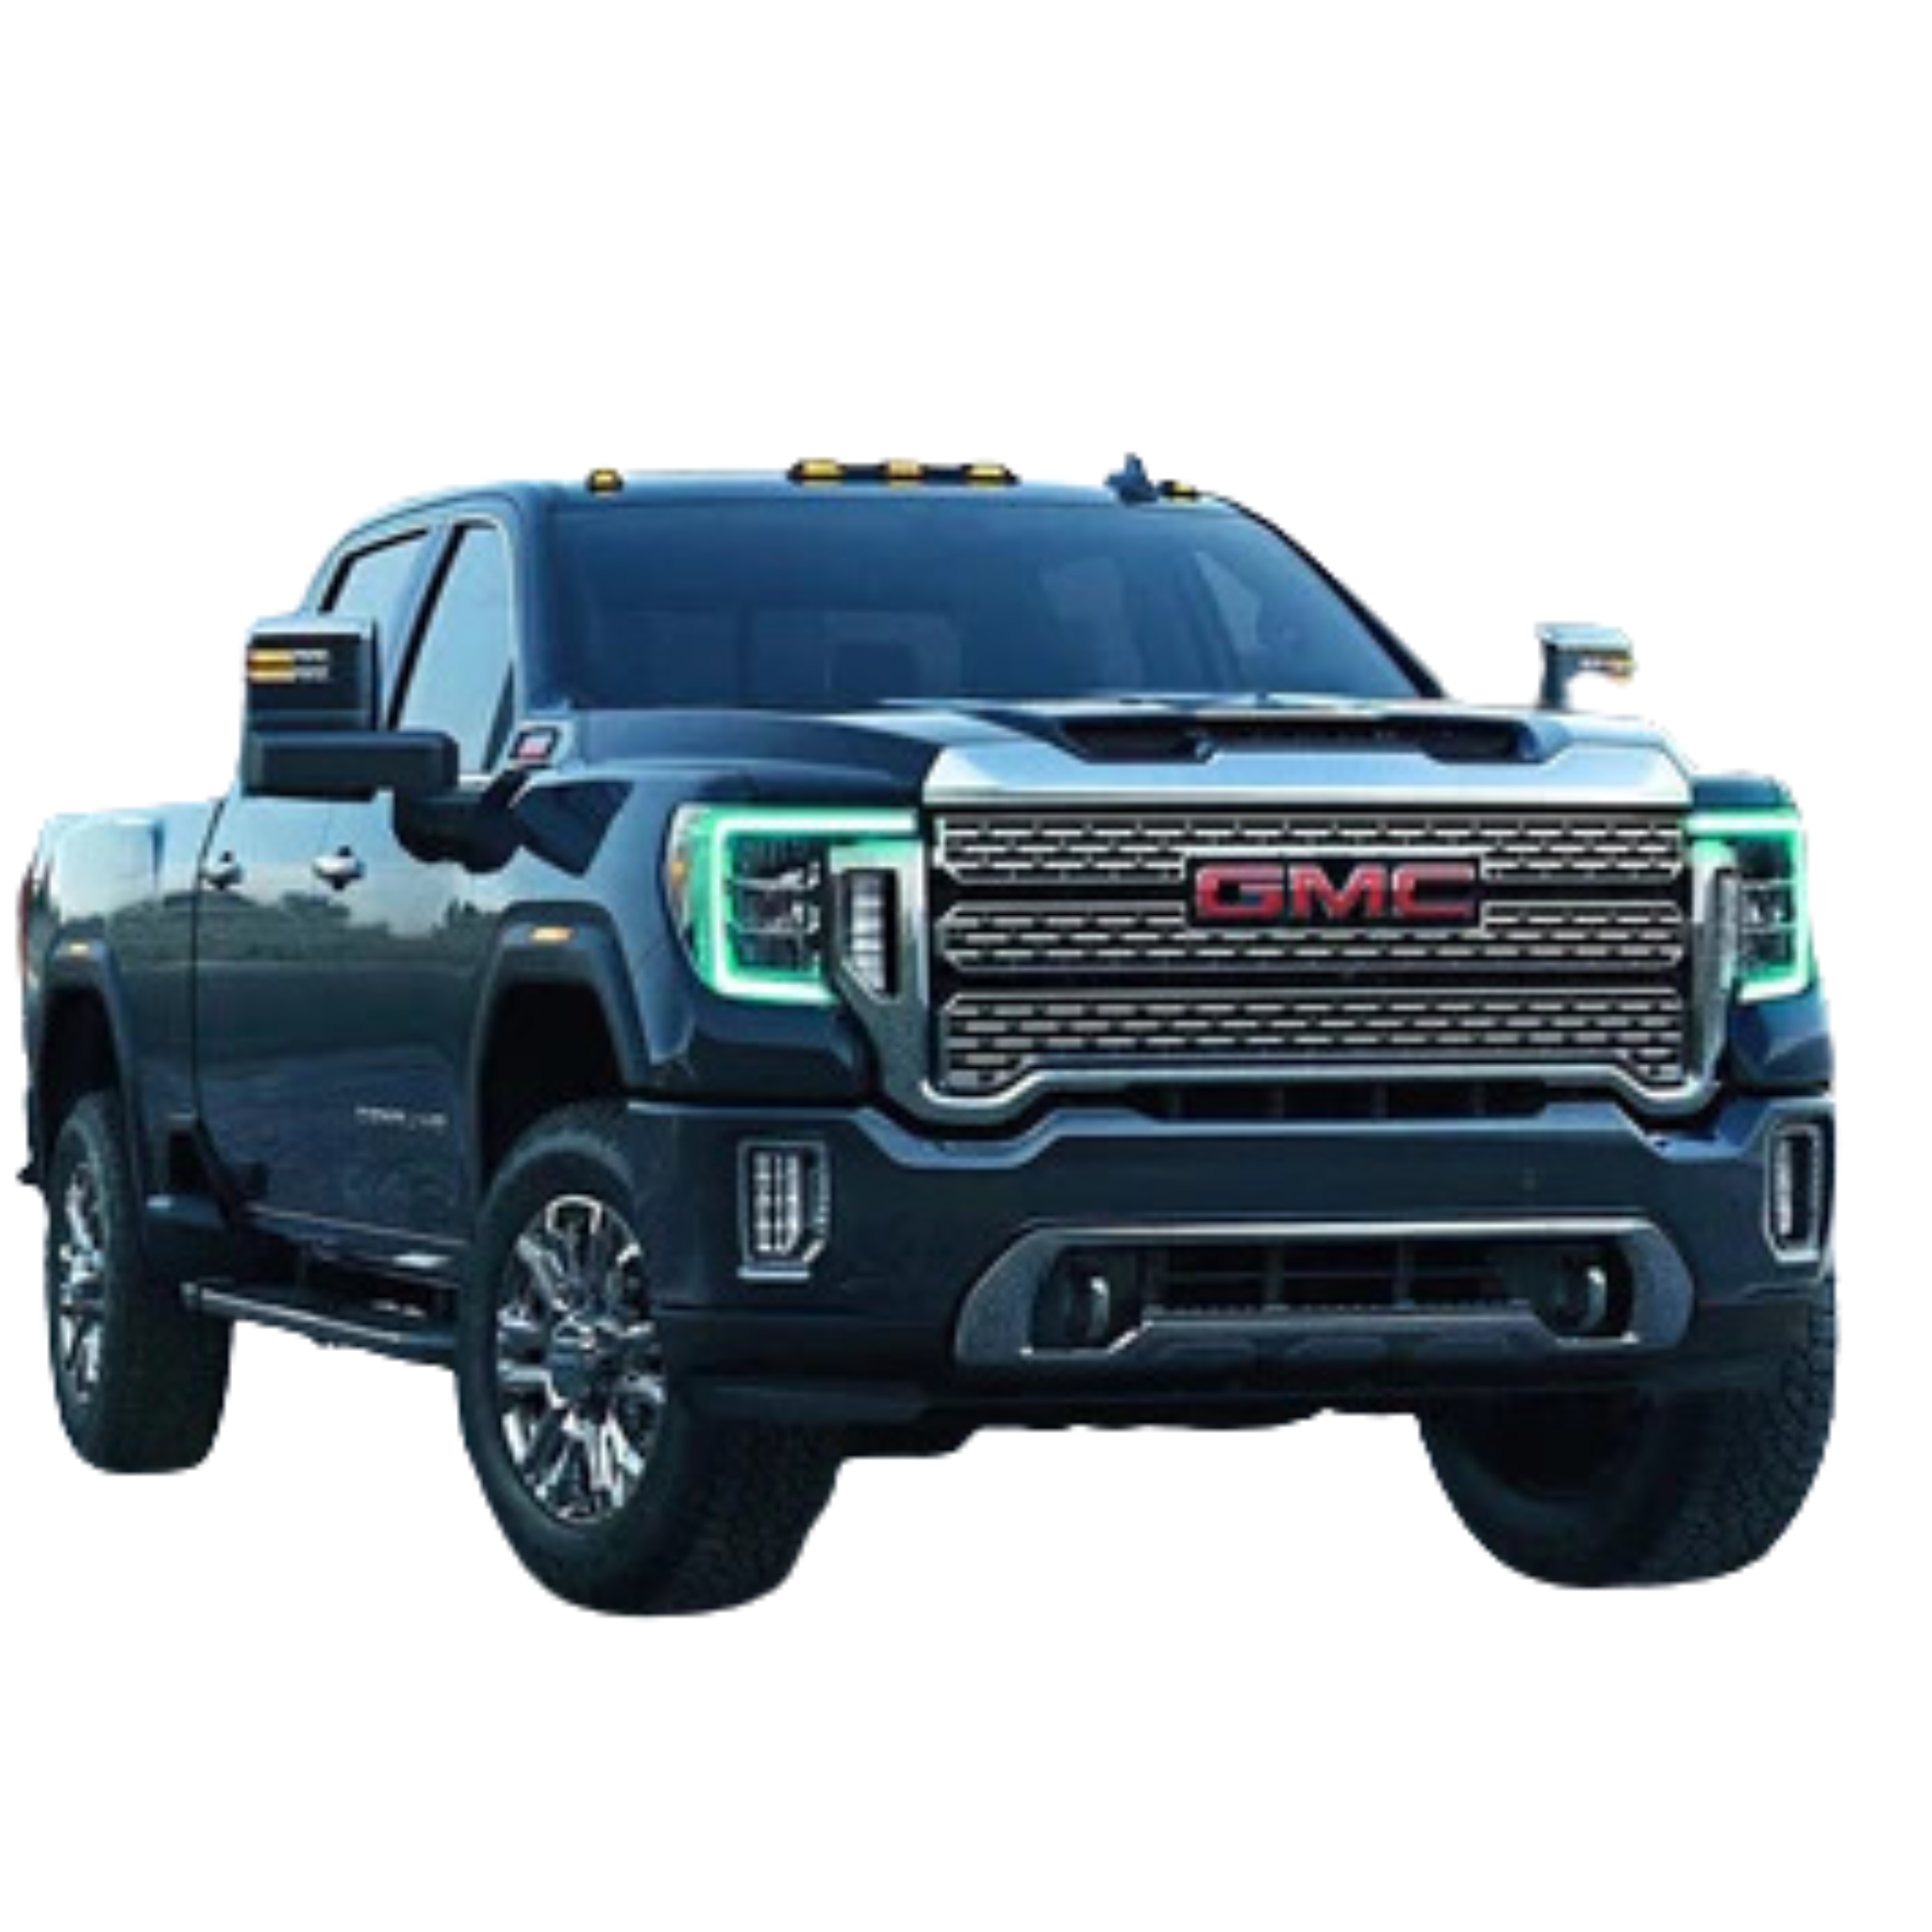 2020-2021 GMC Sierra 2500/3500 HD DRL Boards - RGB Halo Kits Multicolor Flow Series Color Chasing RGBWA LED headlight kit Oracle Lighting Trendz OneUpLighting Morimoto theretrofitsource AutoLEDTech Diode Dynamics